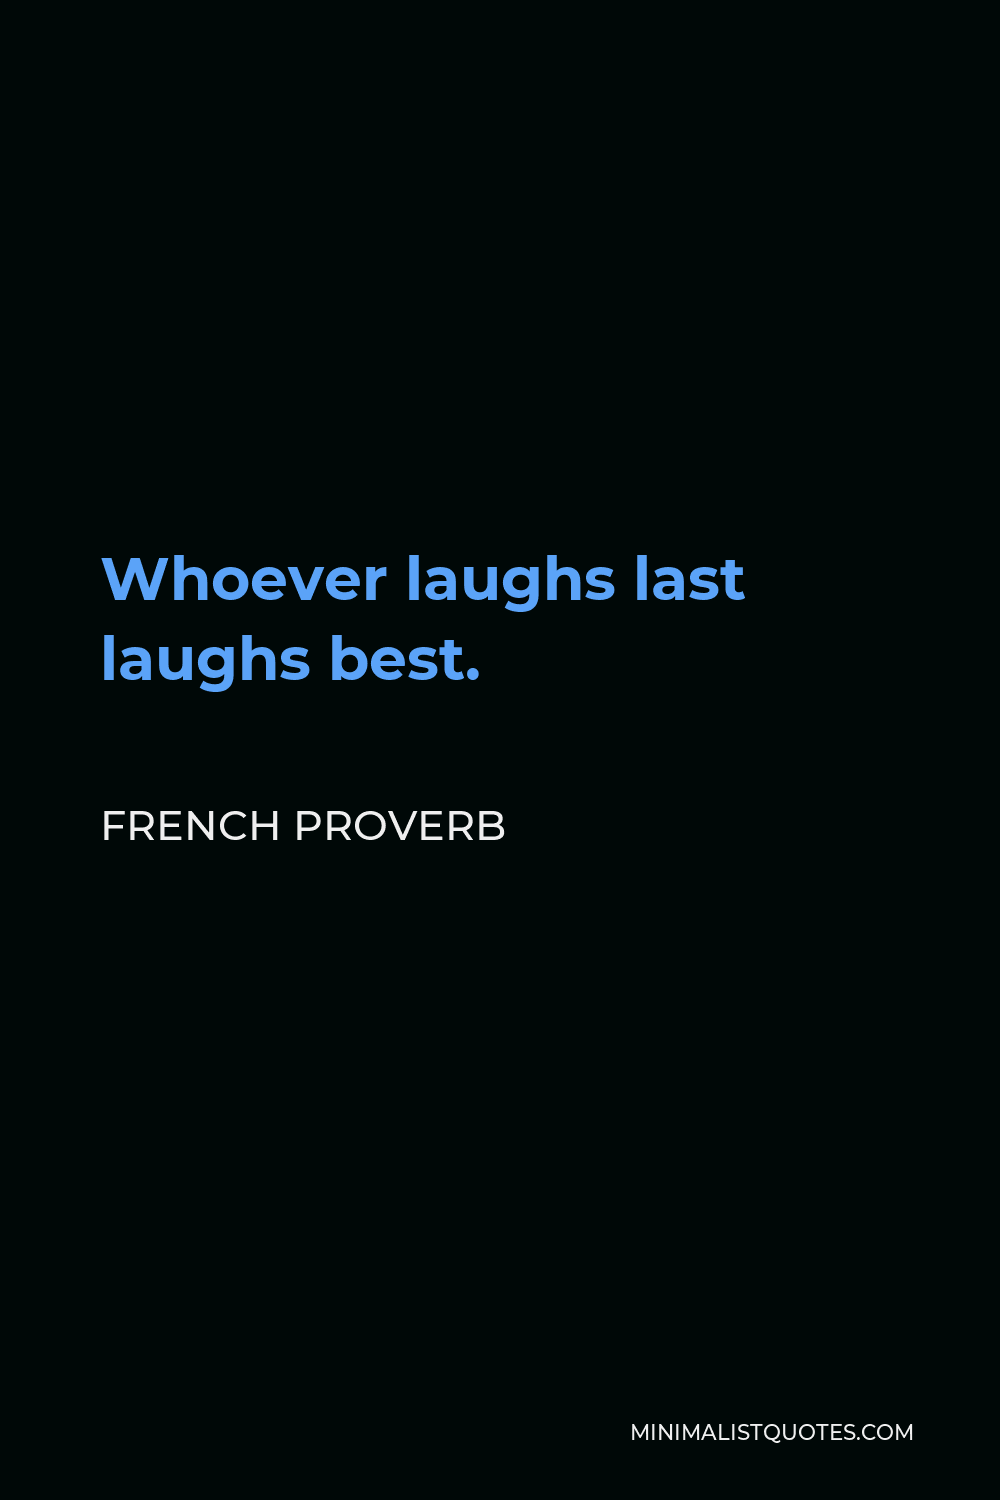 French Proverb Quote - Whoever laughs last laughs best.